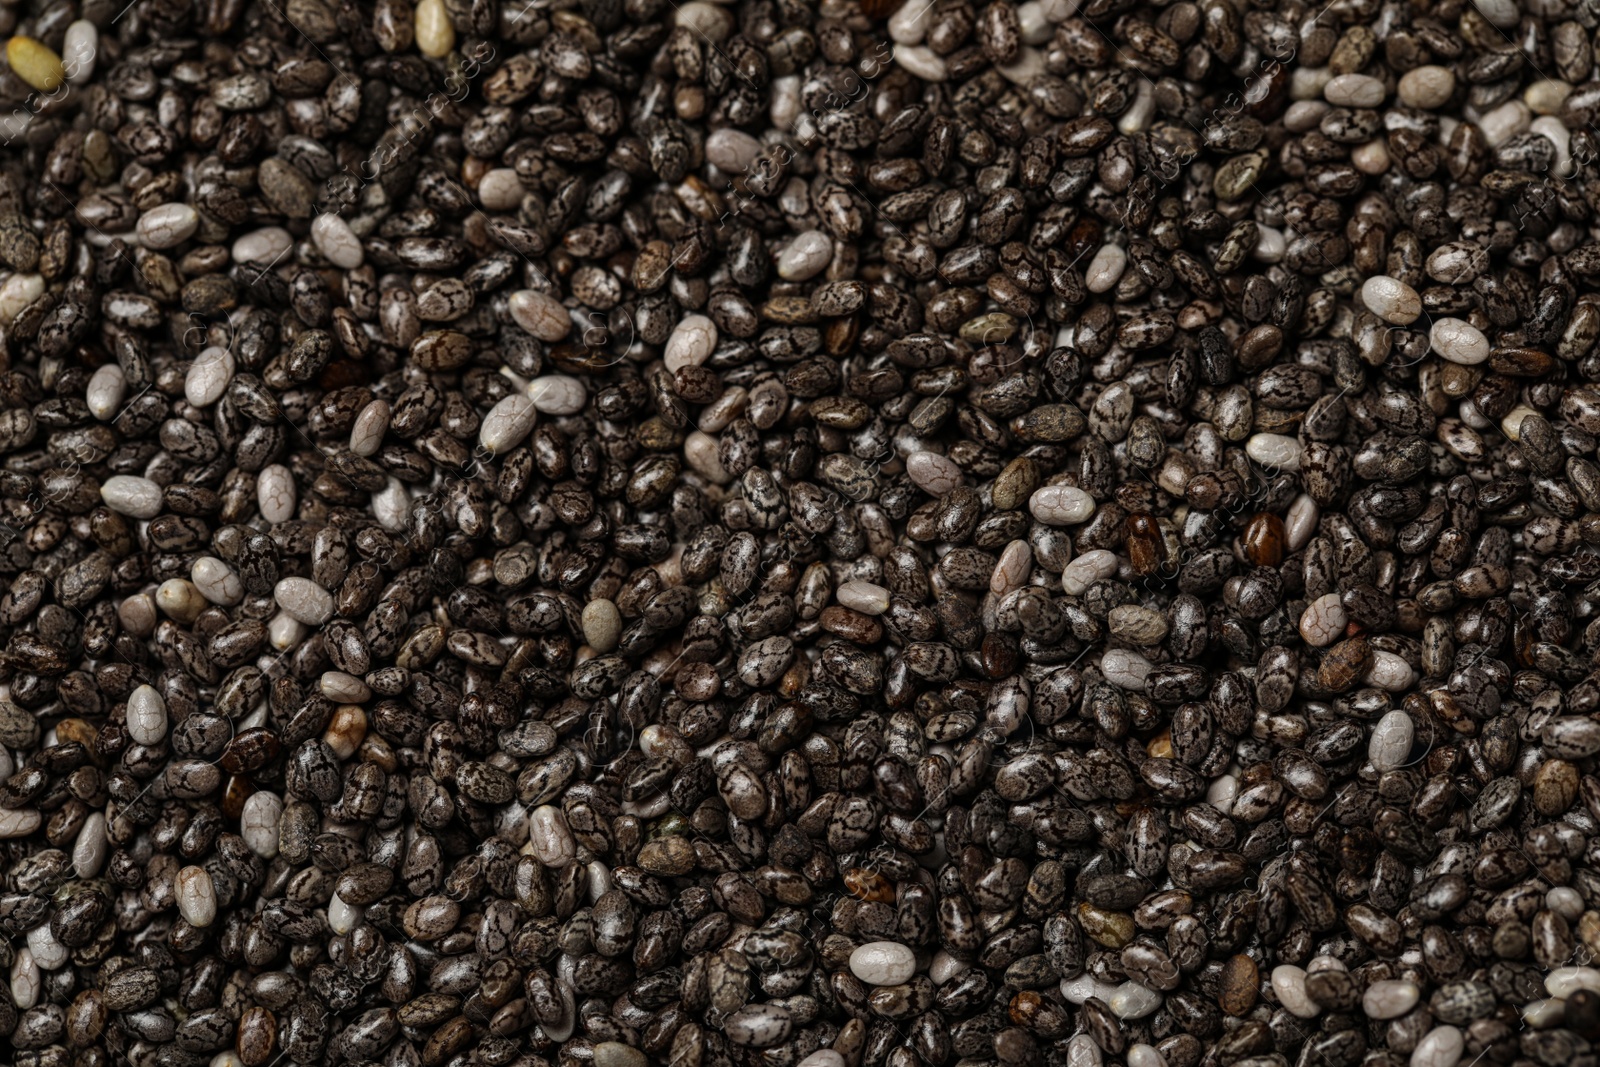 Photo of Chia seeds as background, top view. Organic superfood